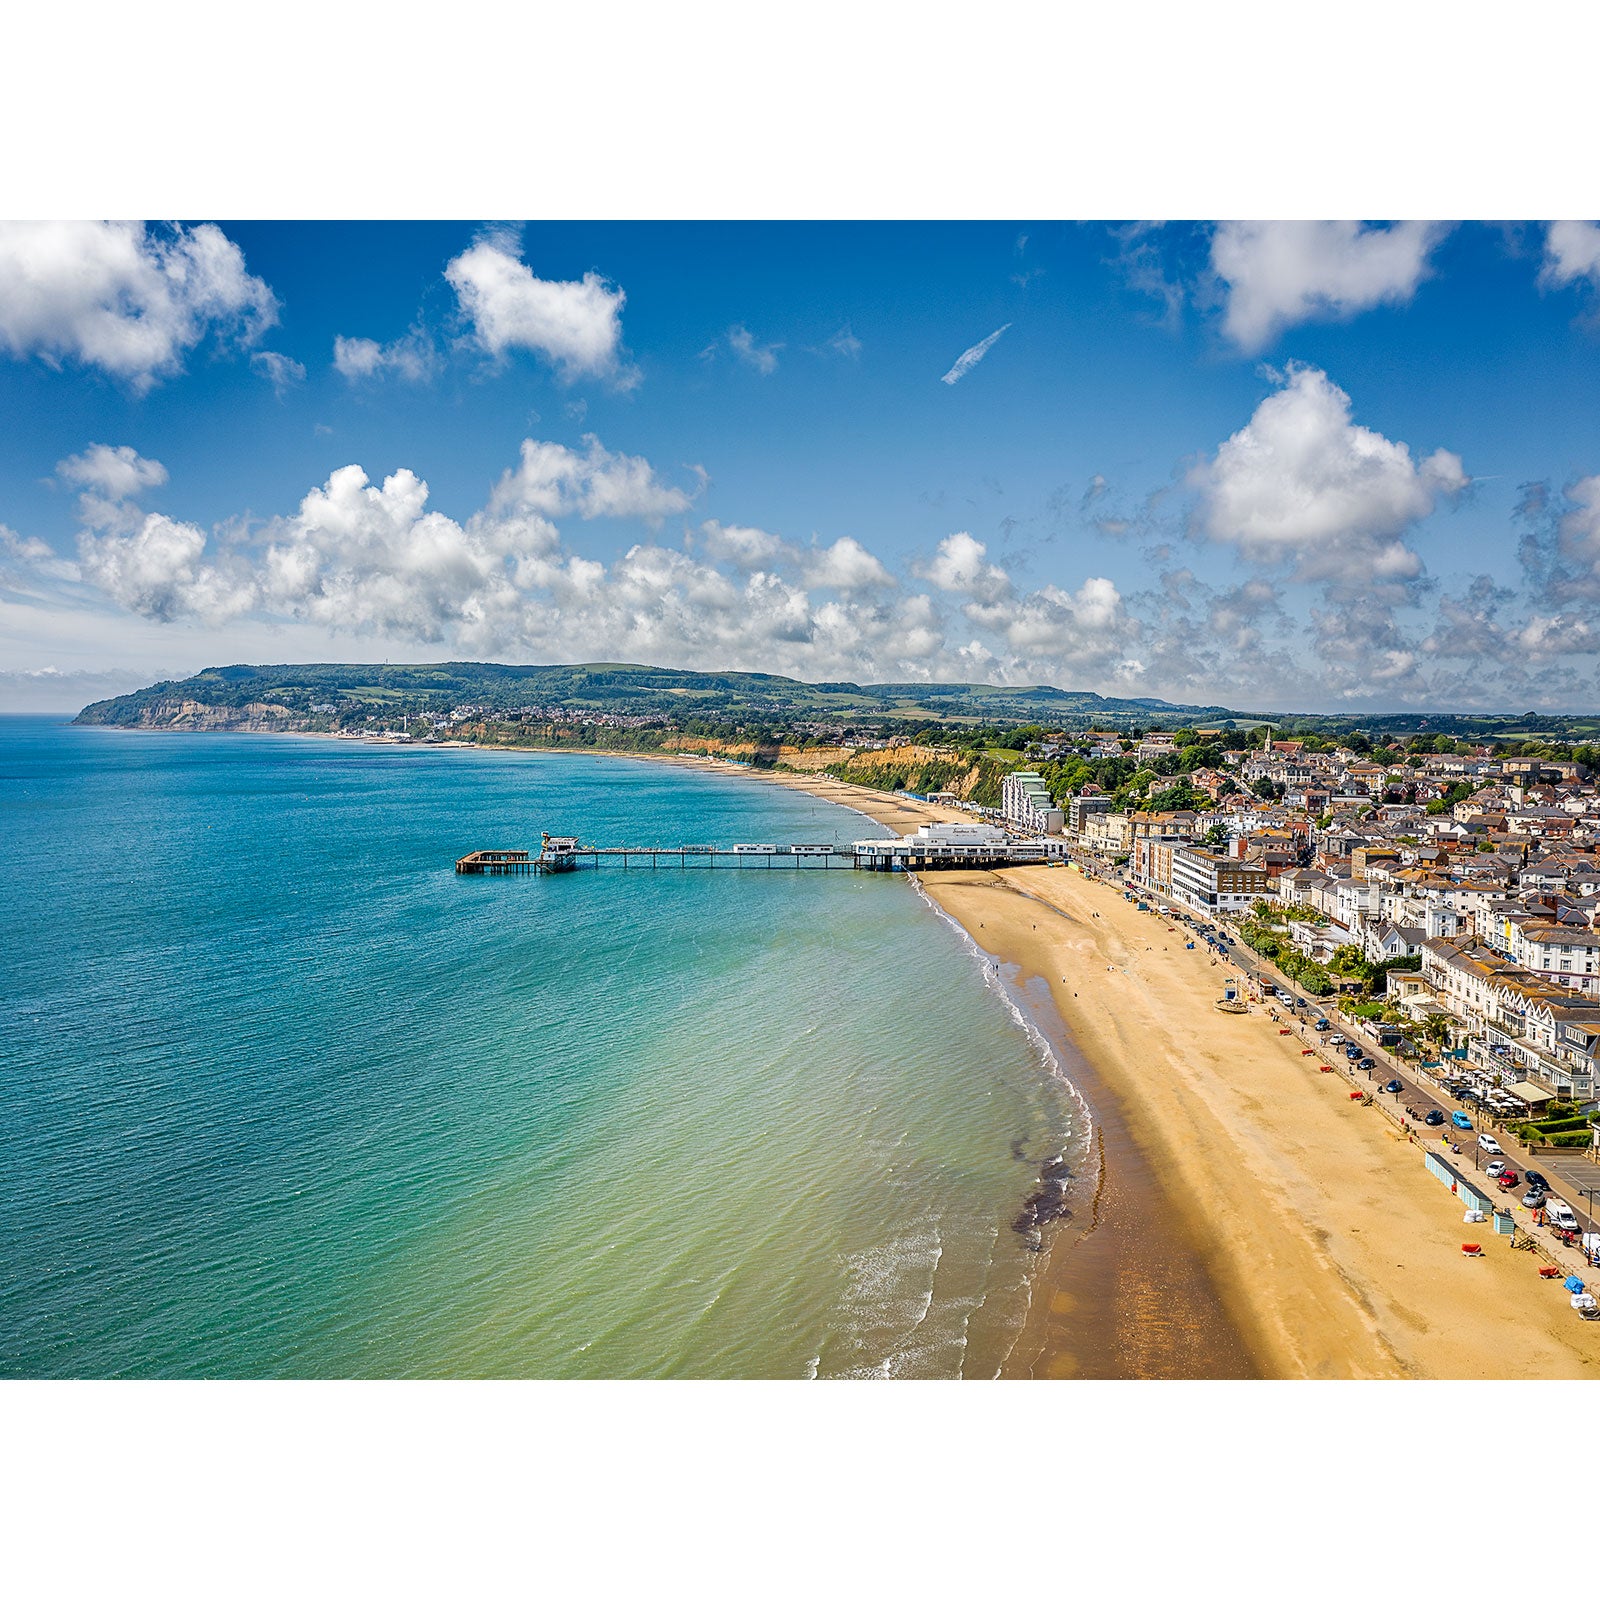 Aerial view of Sandown, a coastal town with a pier extending into the sea, sandy beachfront, and a backdrop of hills under a partly cloudy sky on Wight by Available Light Photography.